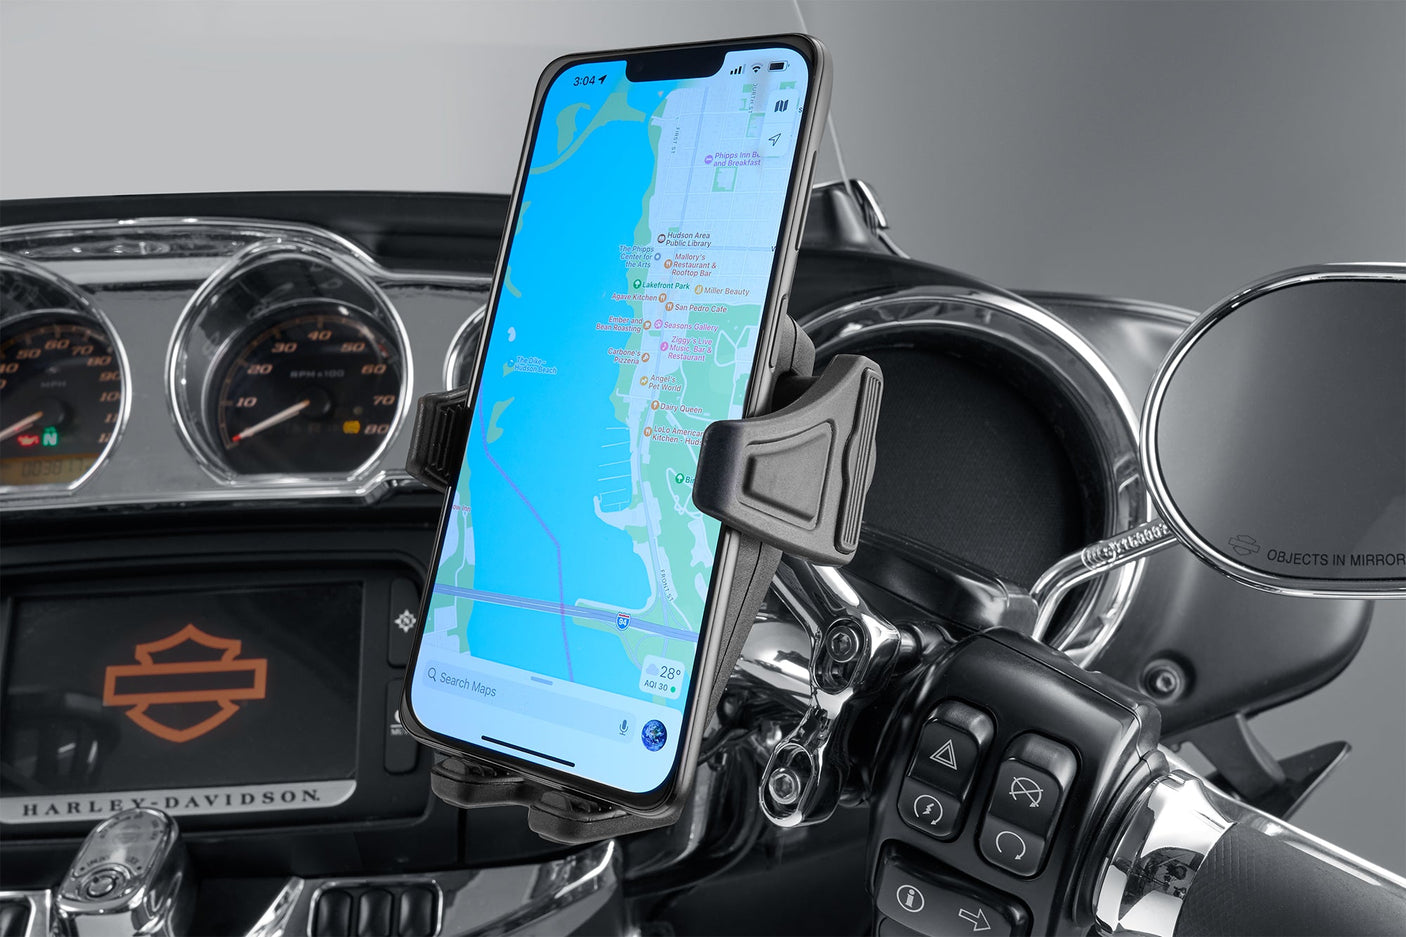 Trim Line Cybercharger Phone Holder with Perch mount